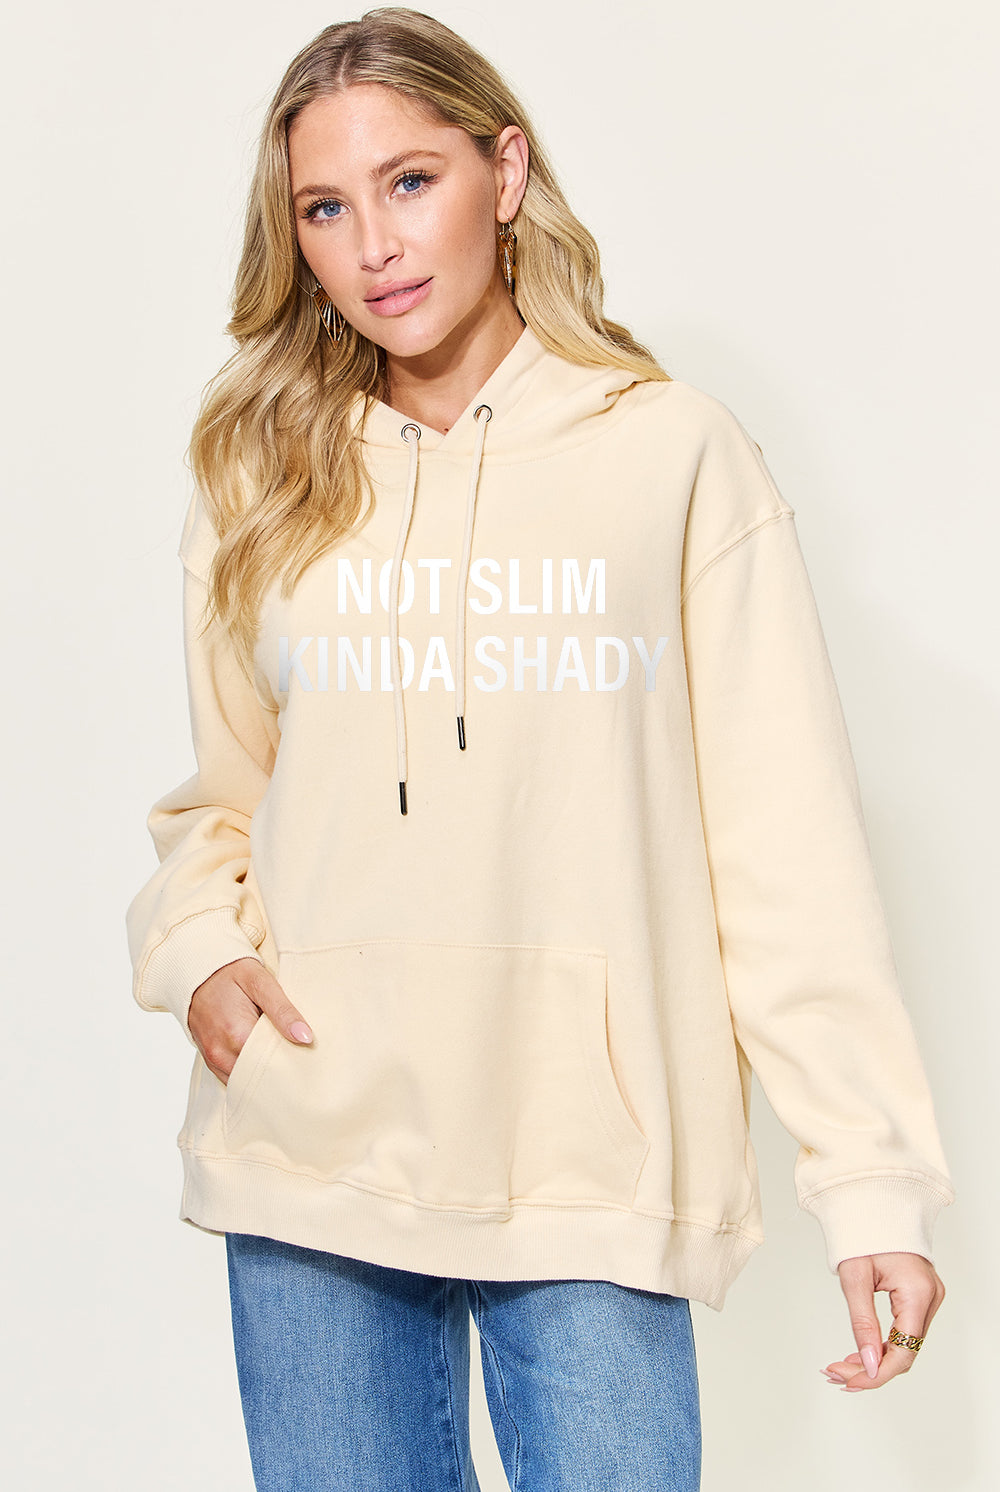 A woman wearing a black oversized hoodie with the text "NOT SLIM KINDA SHADY" printed in bold white letters across the front. The hoodie has a drawstring hood and a large kangaroo pocket. She is casually styled with light-wash denim jeans and has a natural makeup look with her blonde hair styled in loose waves. The overall vibe is relaxed and edgy.